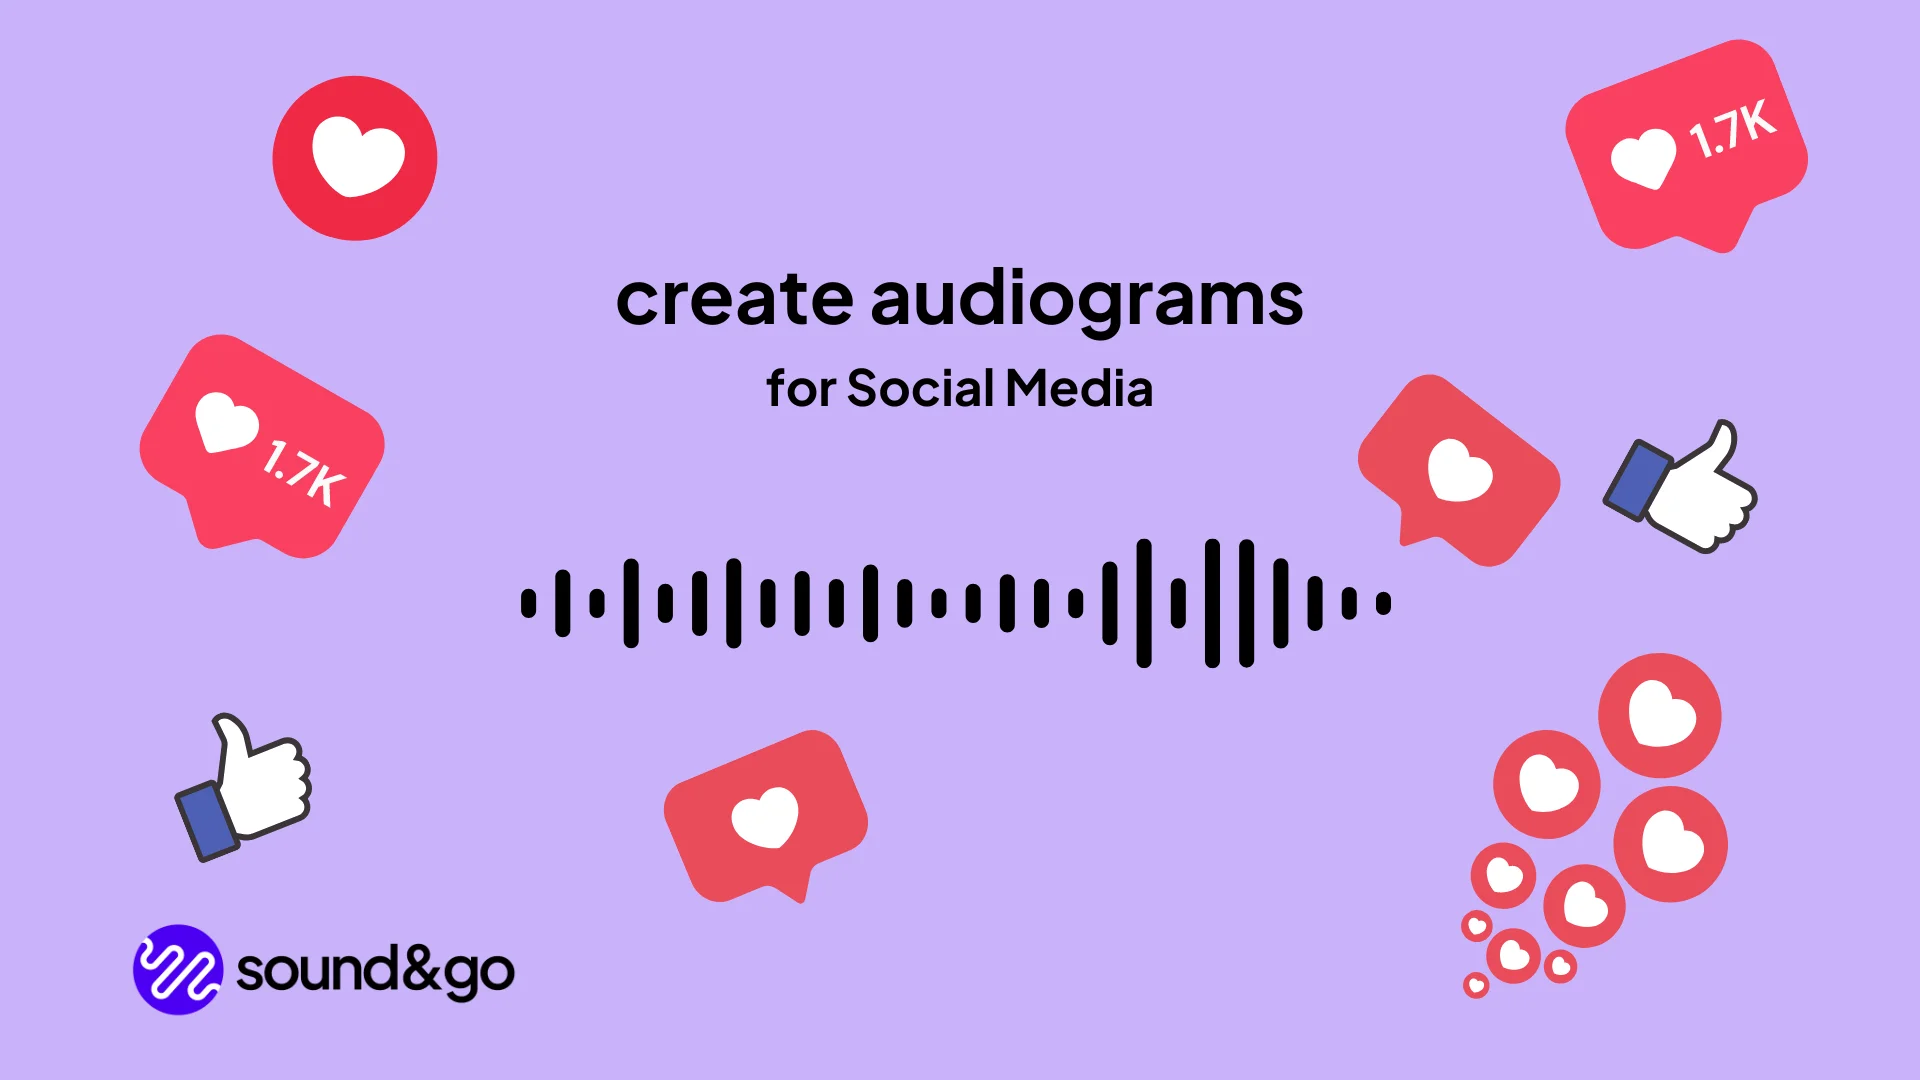 Podcast Audigram - how to create an audiogram for your podcasts